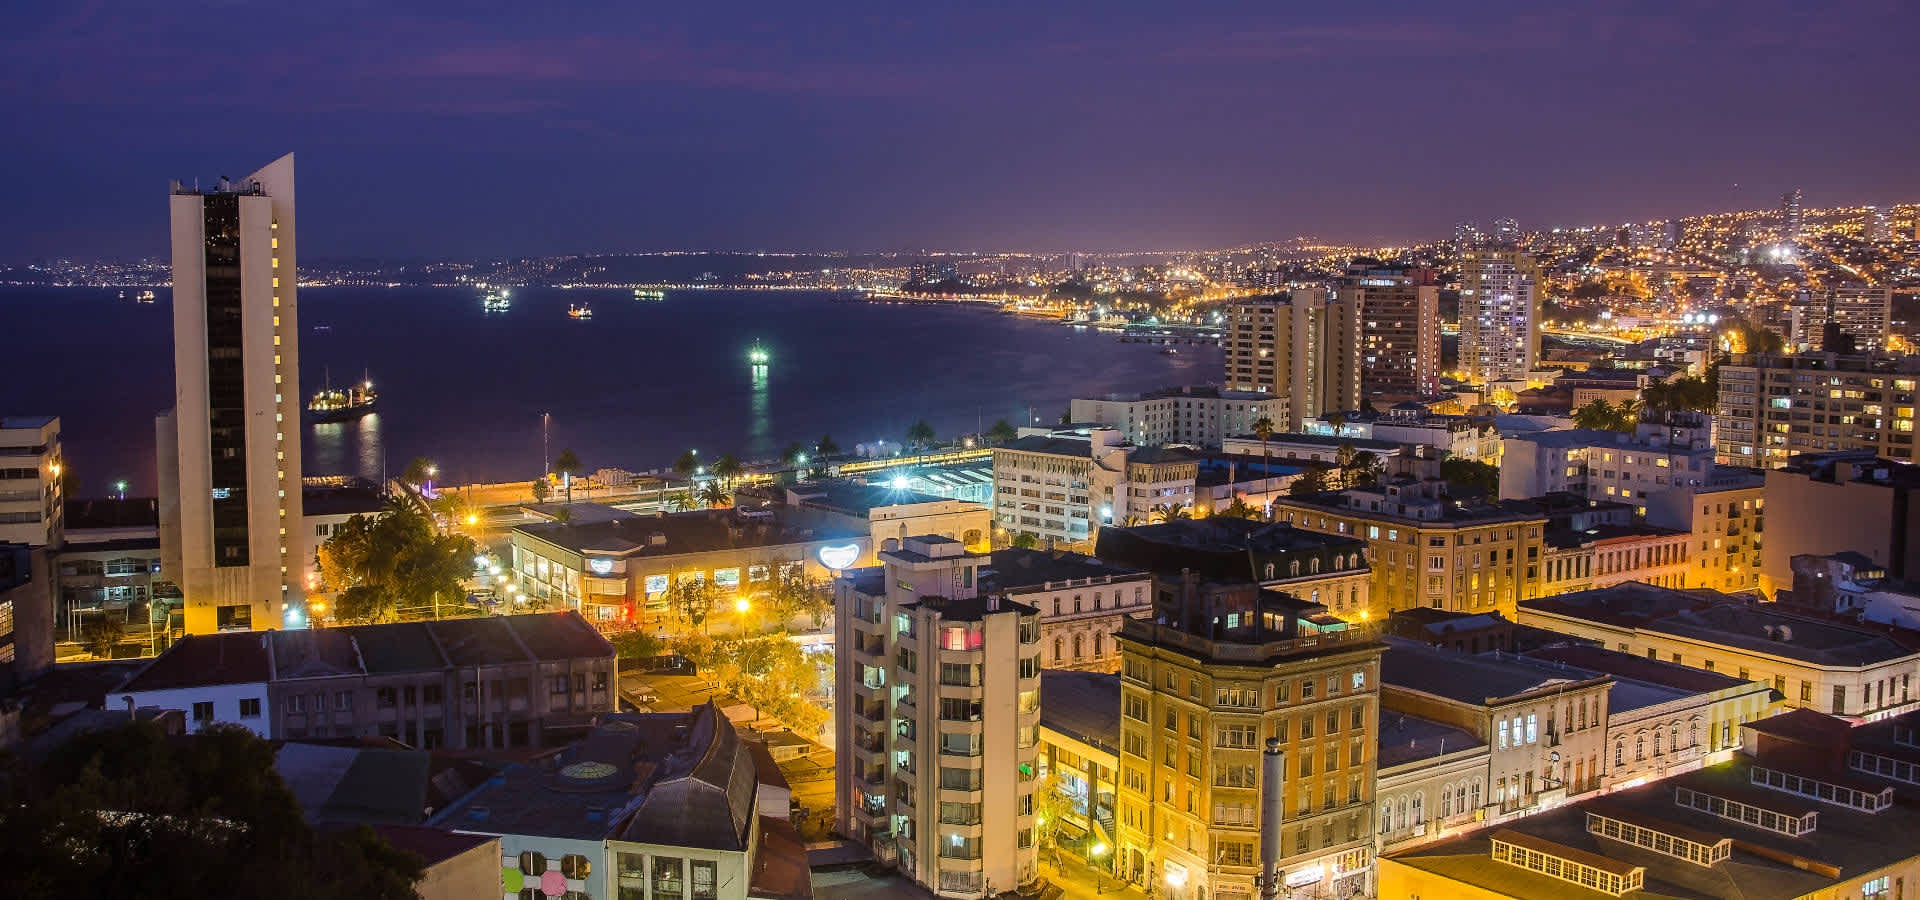 View of the port of Valparaiso at night